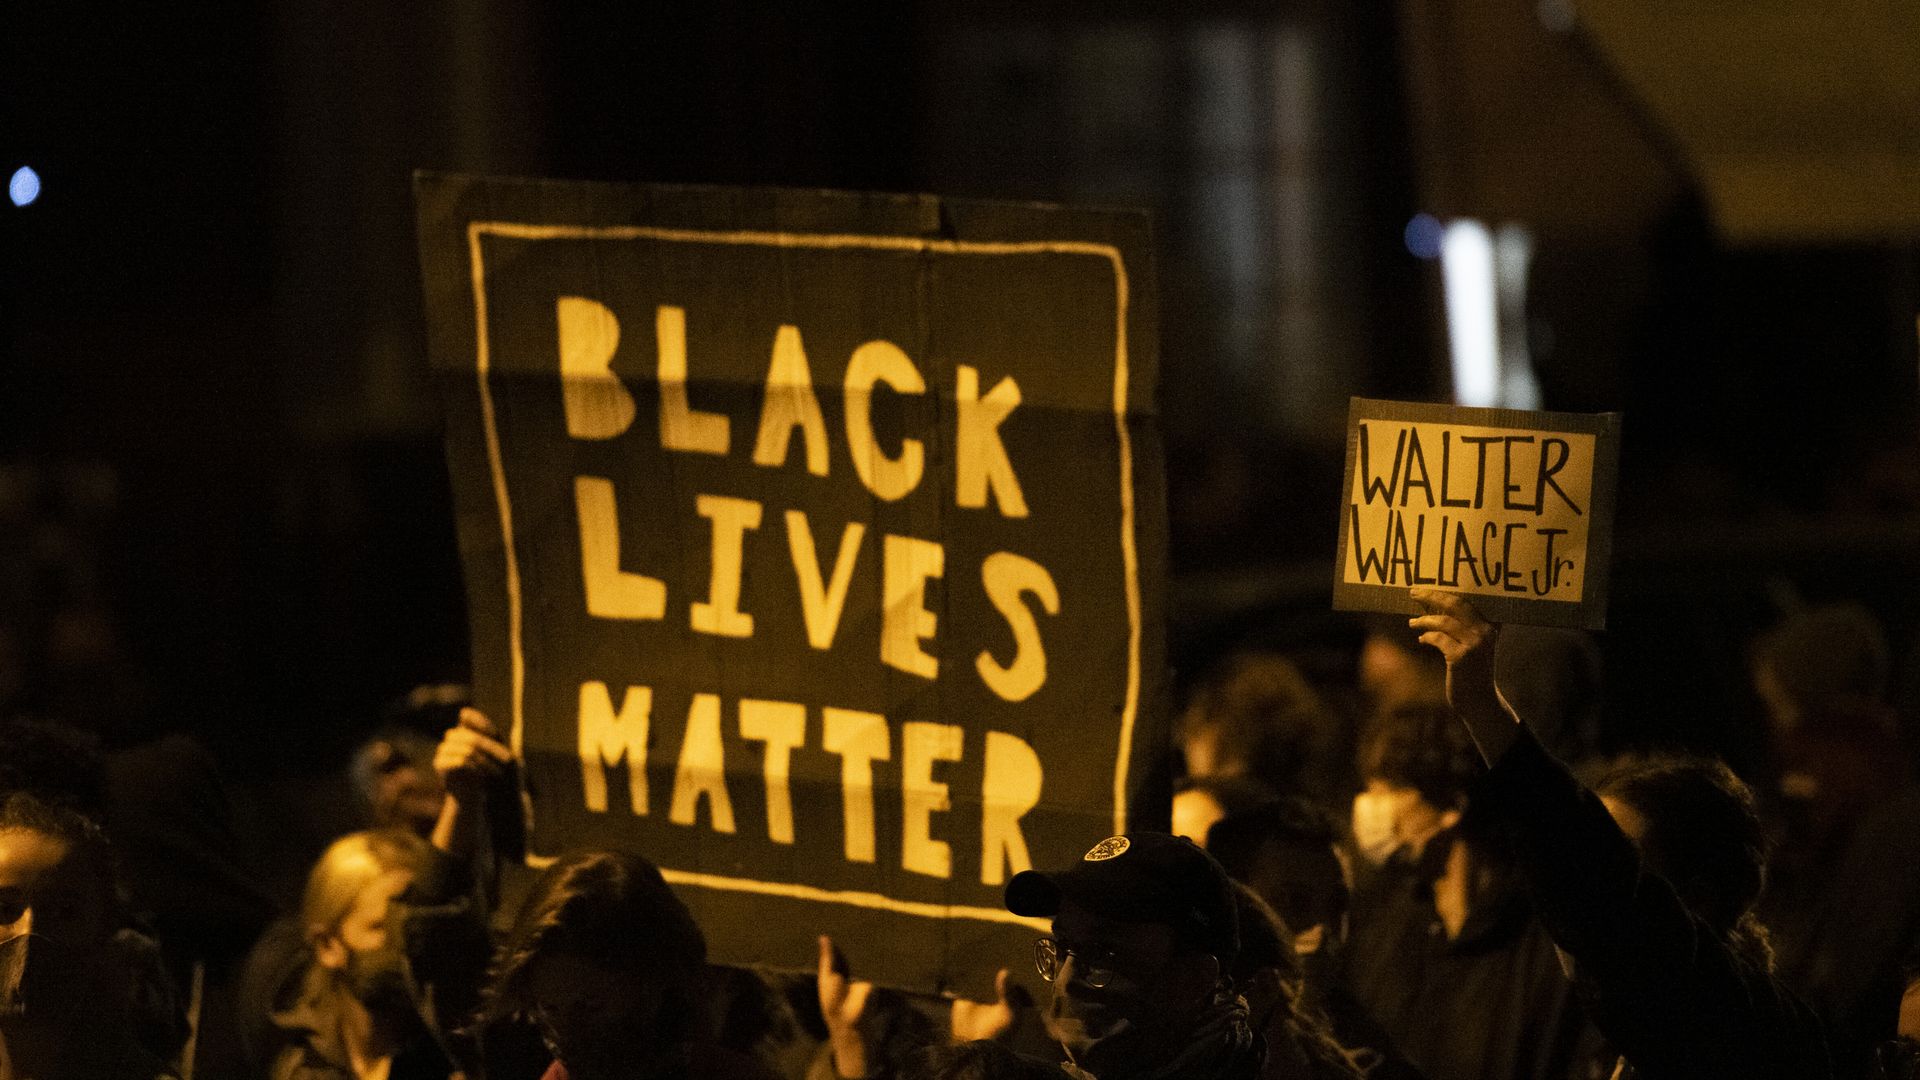 Demonstrators holding placards reading "BLACK LIVES MATTER" and "WALTER WALLACE JR." during a protest . Photo: Mark Makela/Getty Images